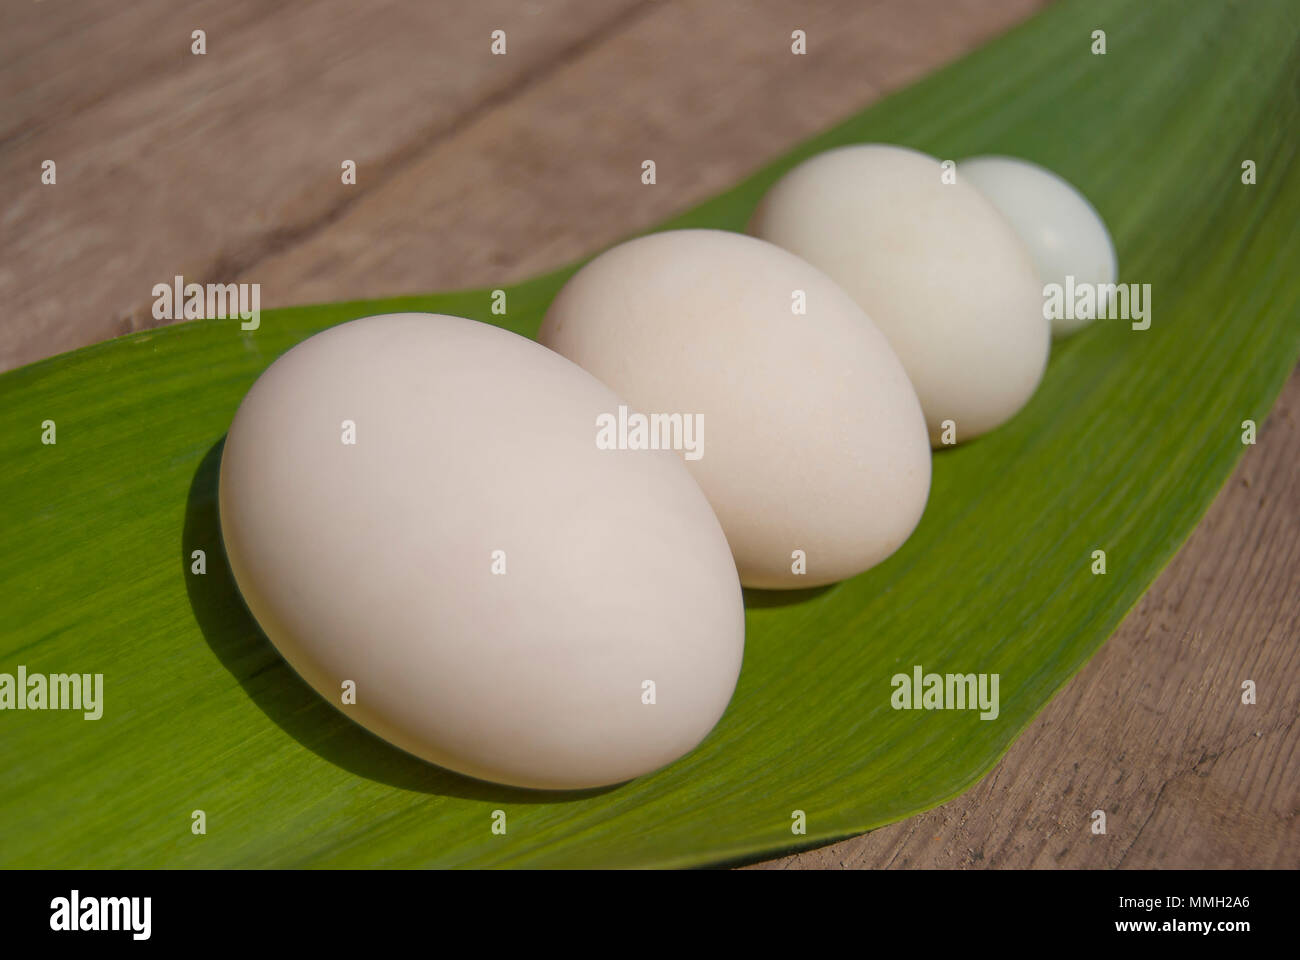 Eggs of different birds: goose, duck, chicken and pigeon lie in a row in size on the green leaf of the plant. Stock Photo